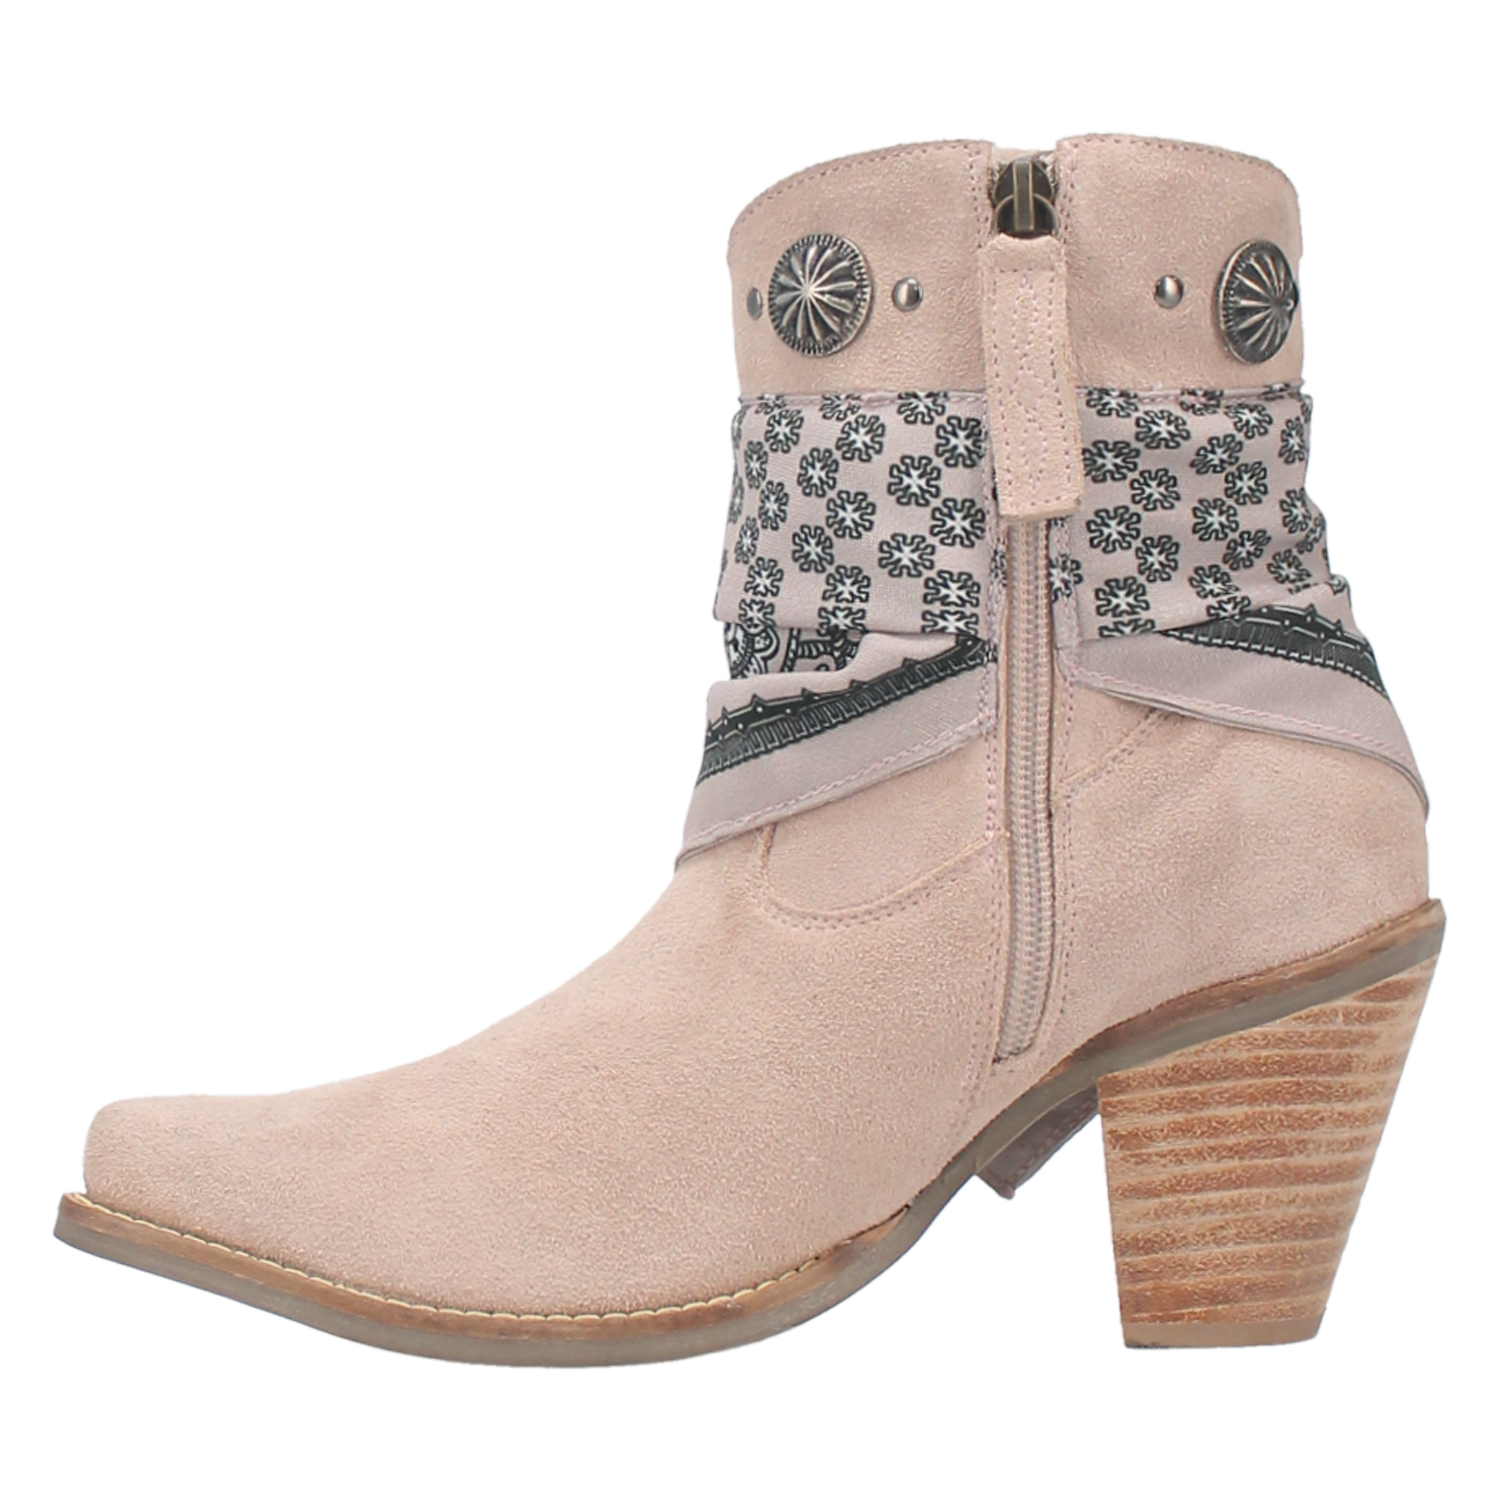 Bandida Sand Suede Silver Concho Bandana Wrapped Booties (DS)